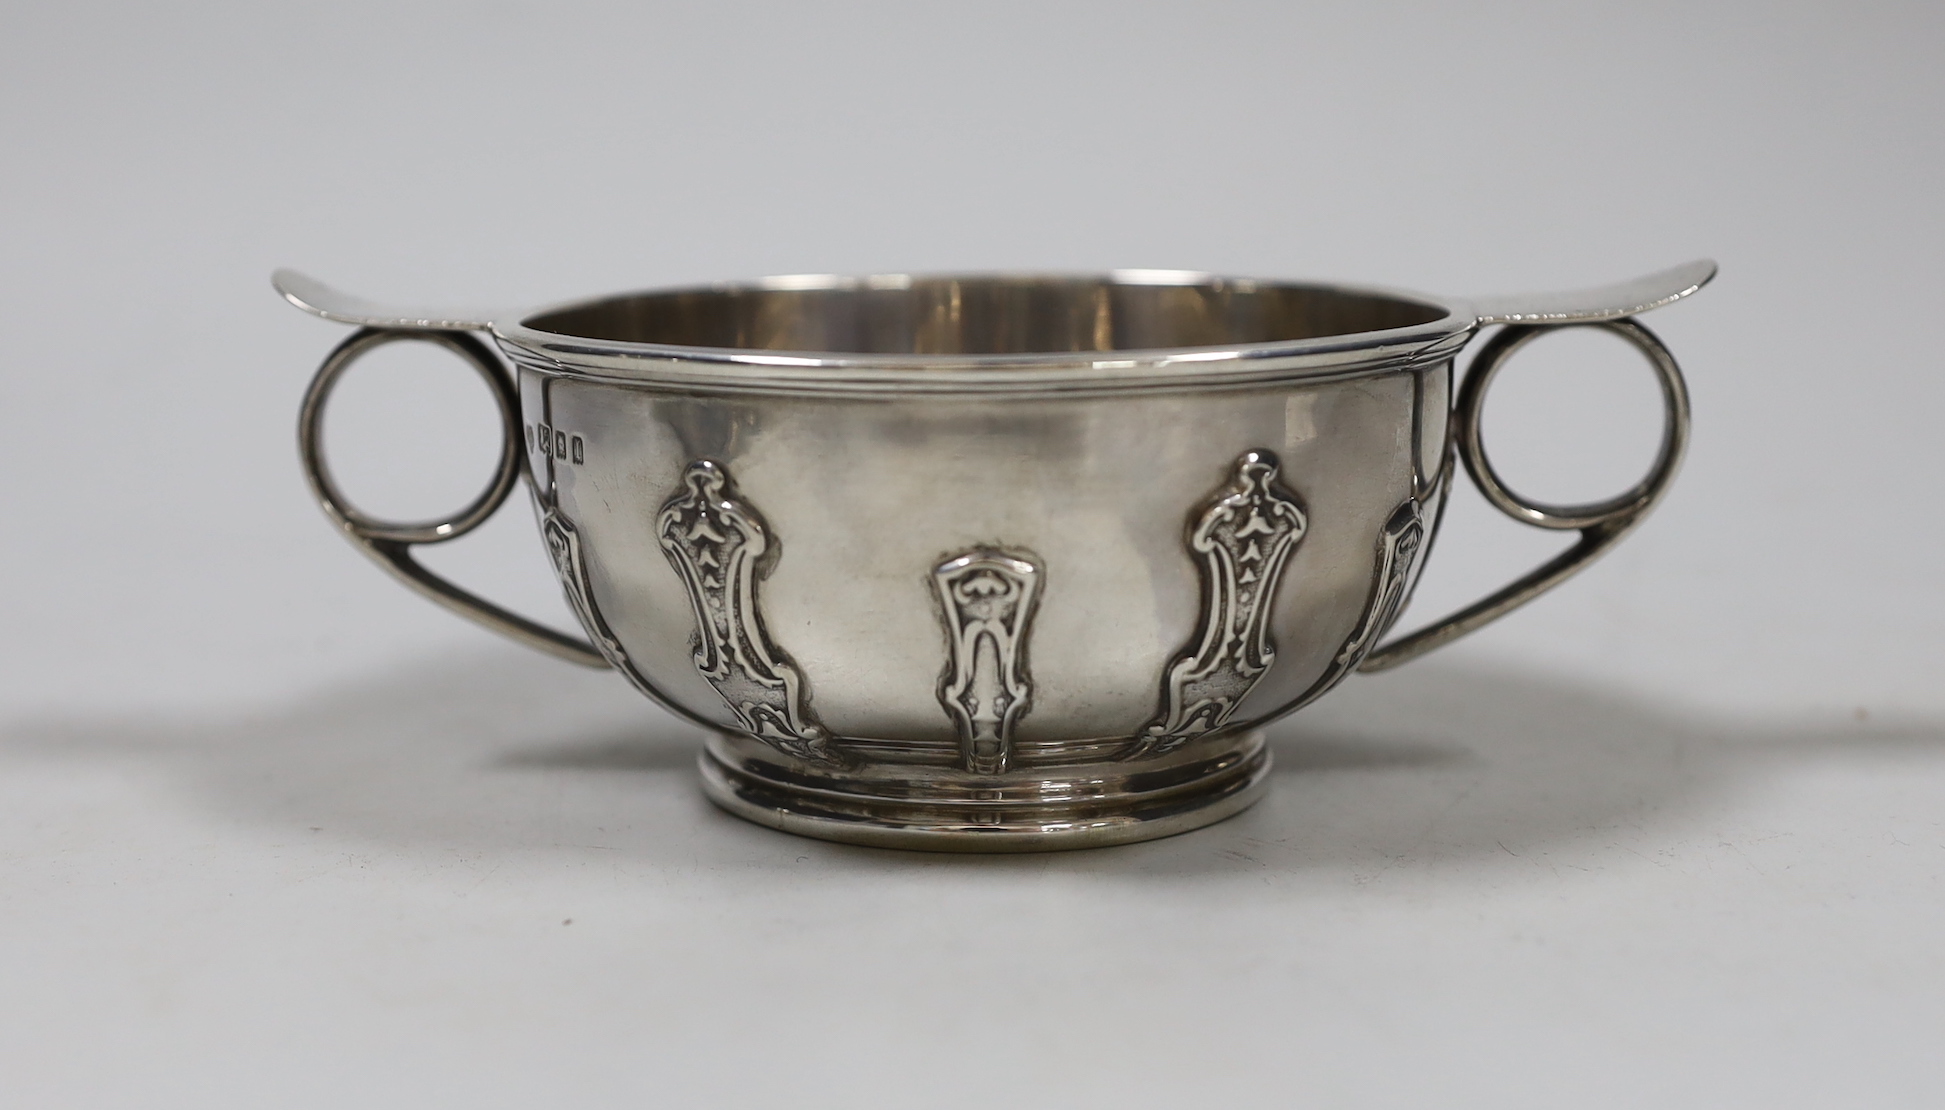 A George V silver two handled bowl, with cut card decoration, Goldsmiths & Silversmiths Co Ltd London, 1926. diameter 16.3cm over handles, 8.4oz.                                                                           